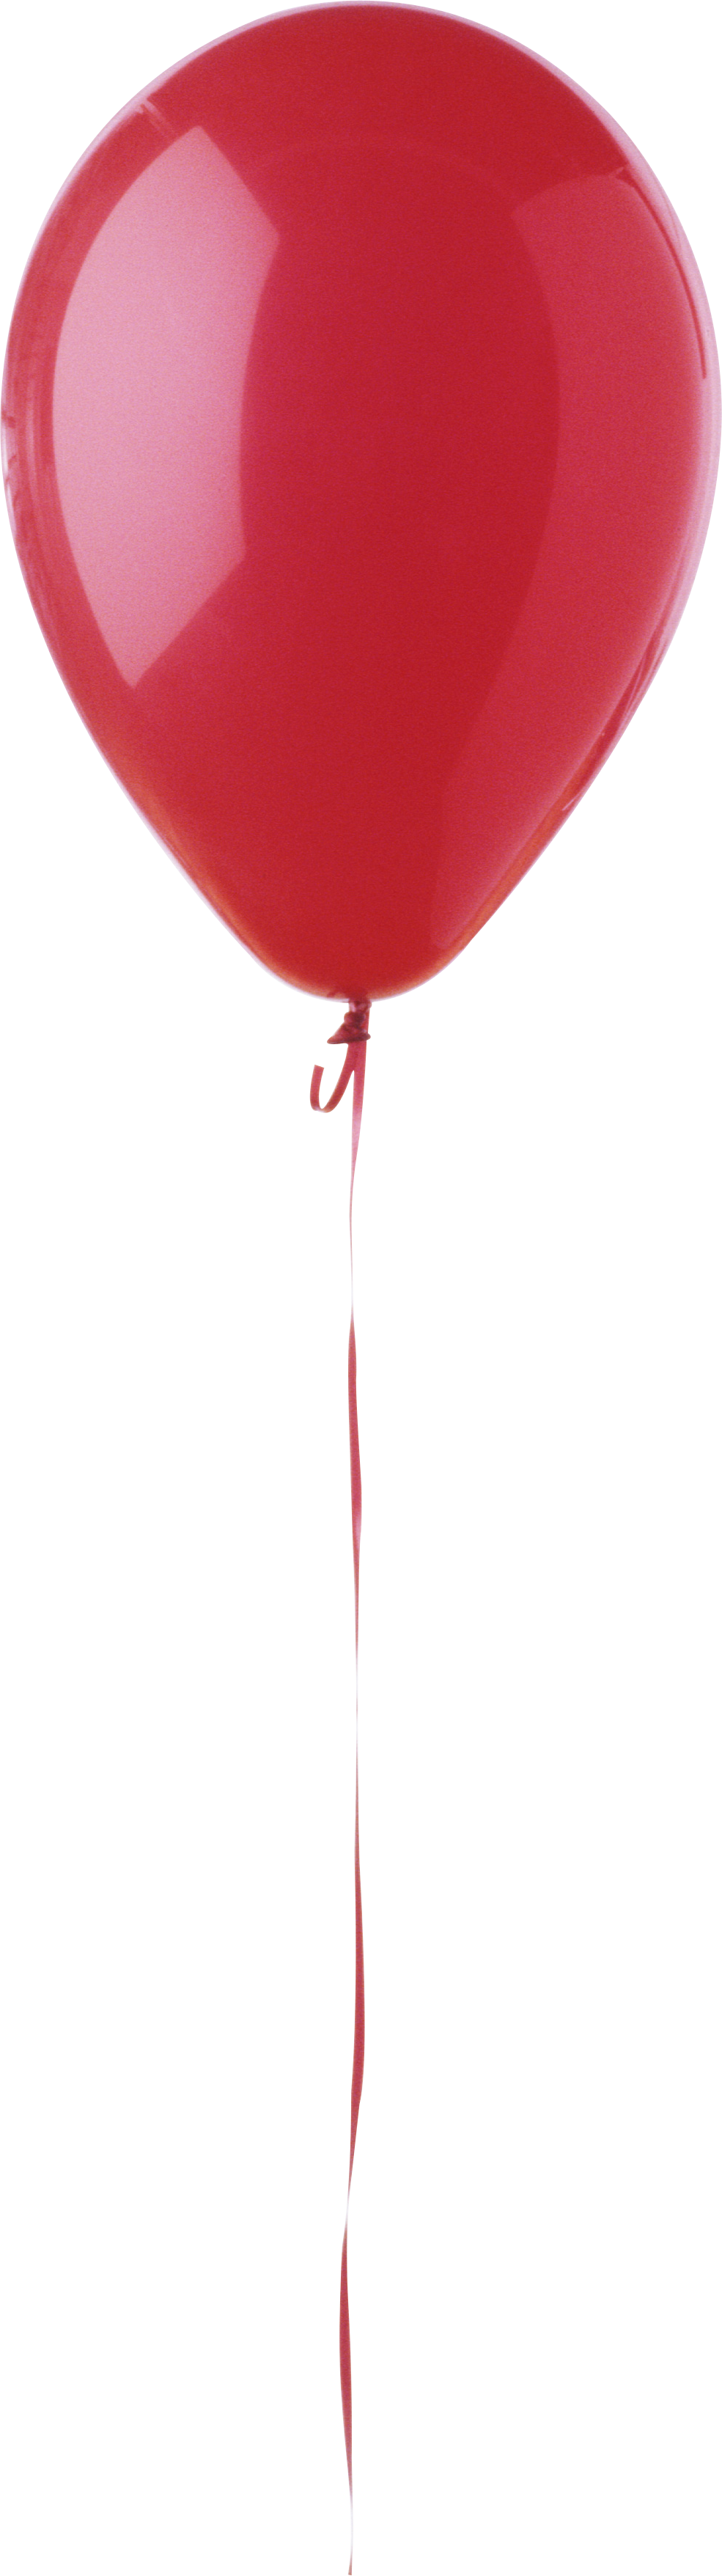 birthday balloon red one sing